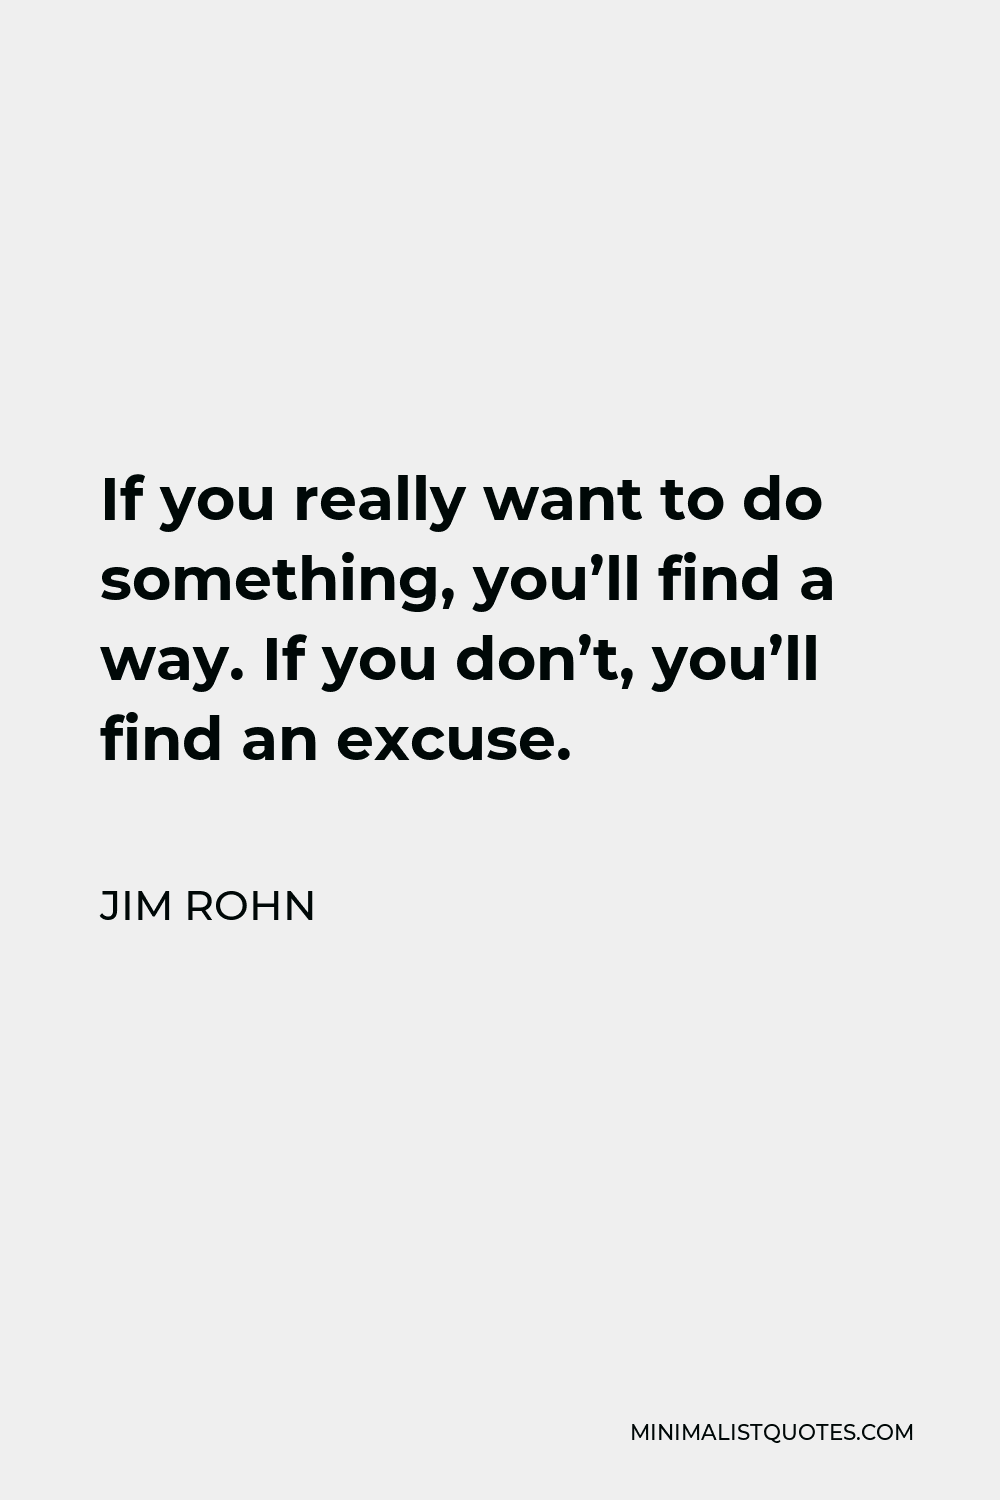 Jim Rohn Quote If You Really Want To Do Something You Ll Find A Way If You Don T You Ll Find